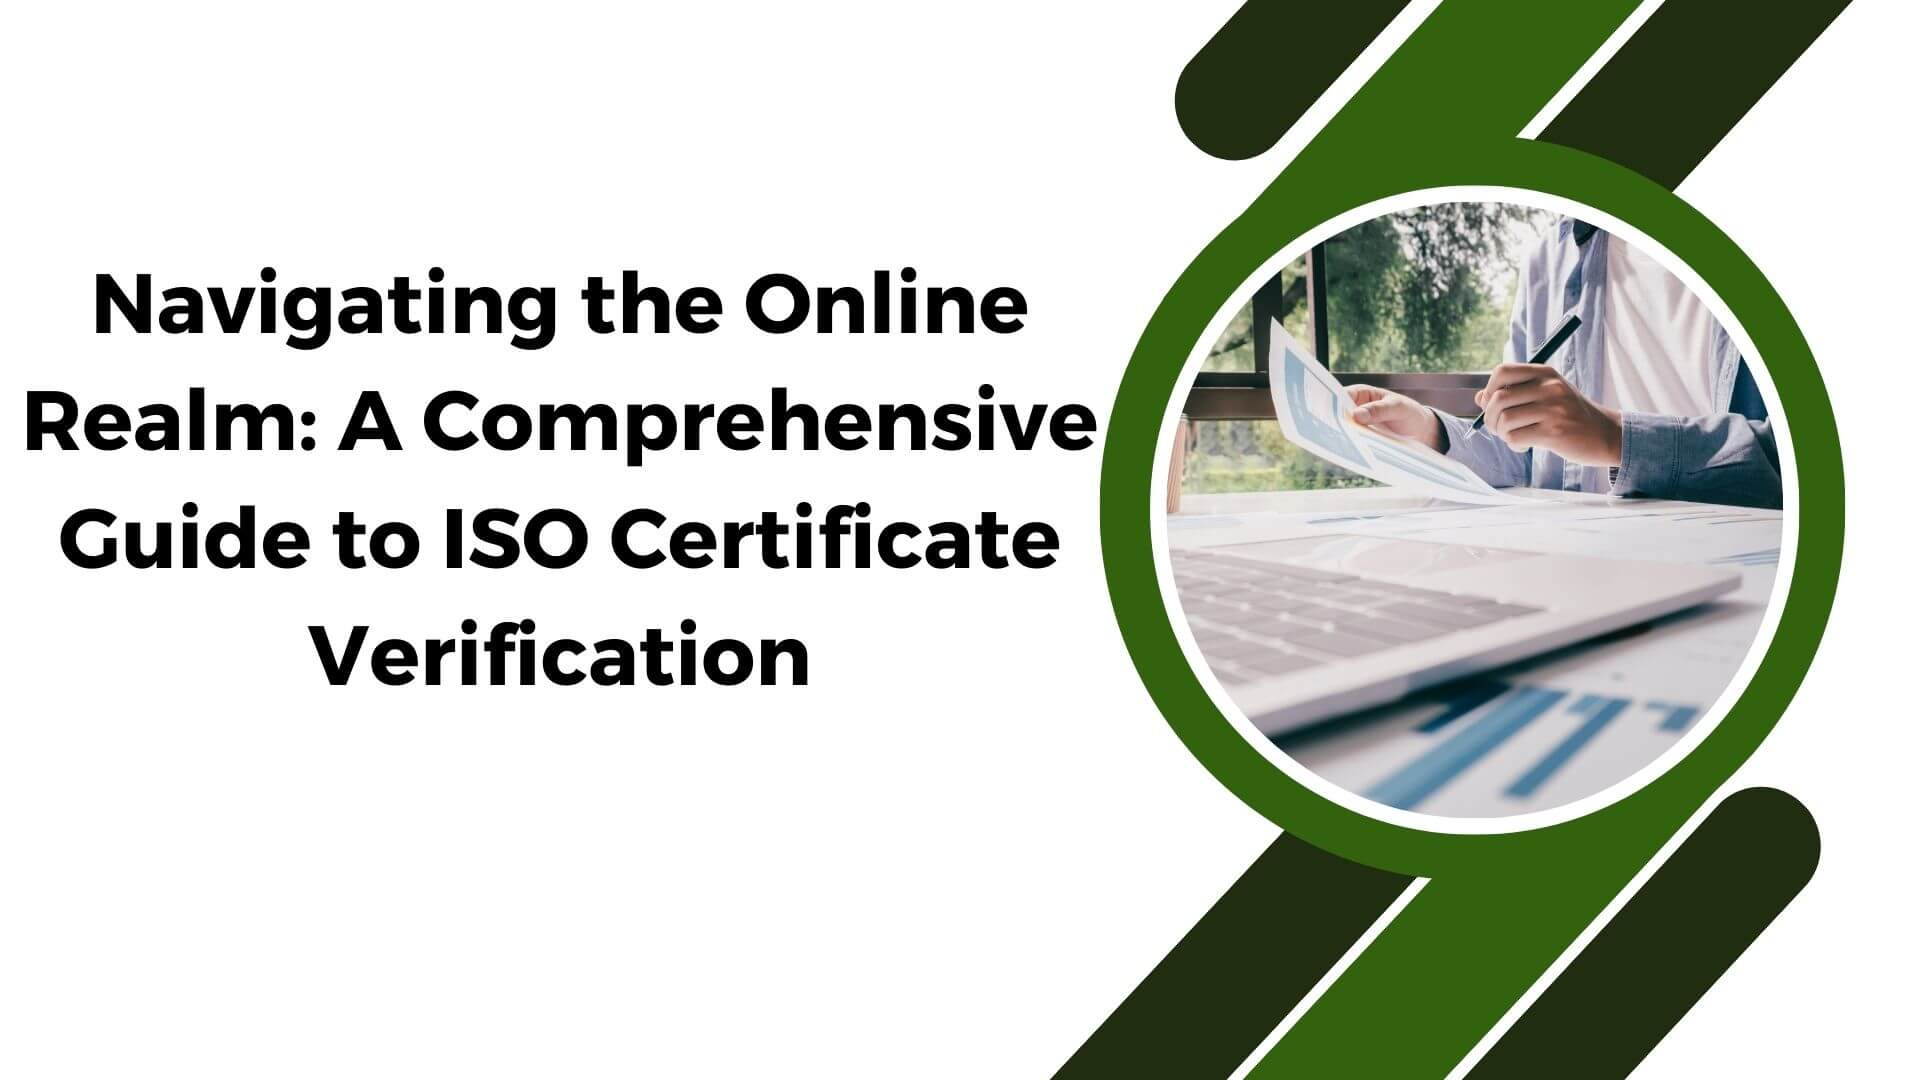 Navigating the Online Realm: A Comprehensive Guide to ISO Certificate Verification